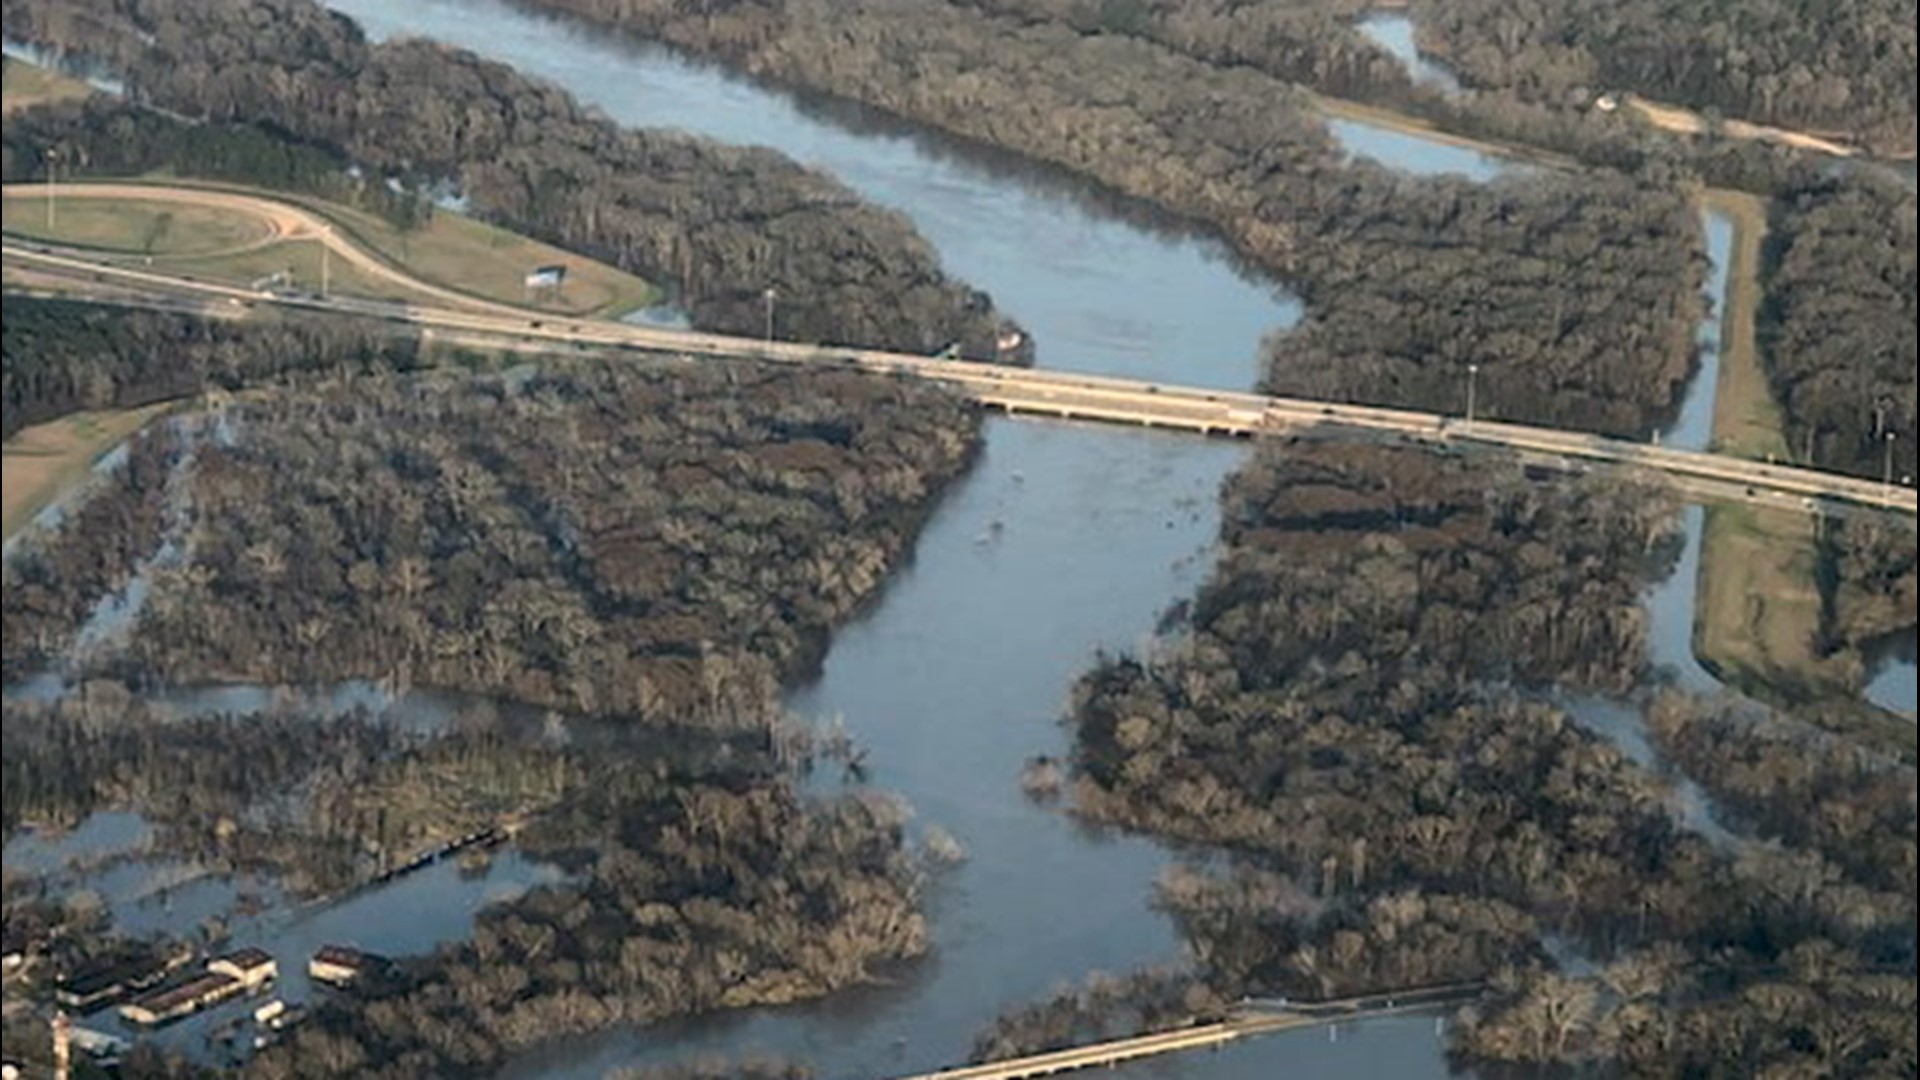 On Feb. 16, Jackson, Mississippi, was hit by terrible flooding as the Pearl River rose to disastrous heights. These photos shot from the air show its impact.